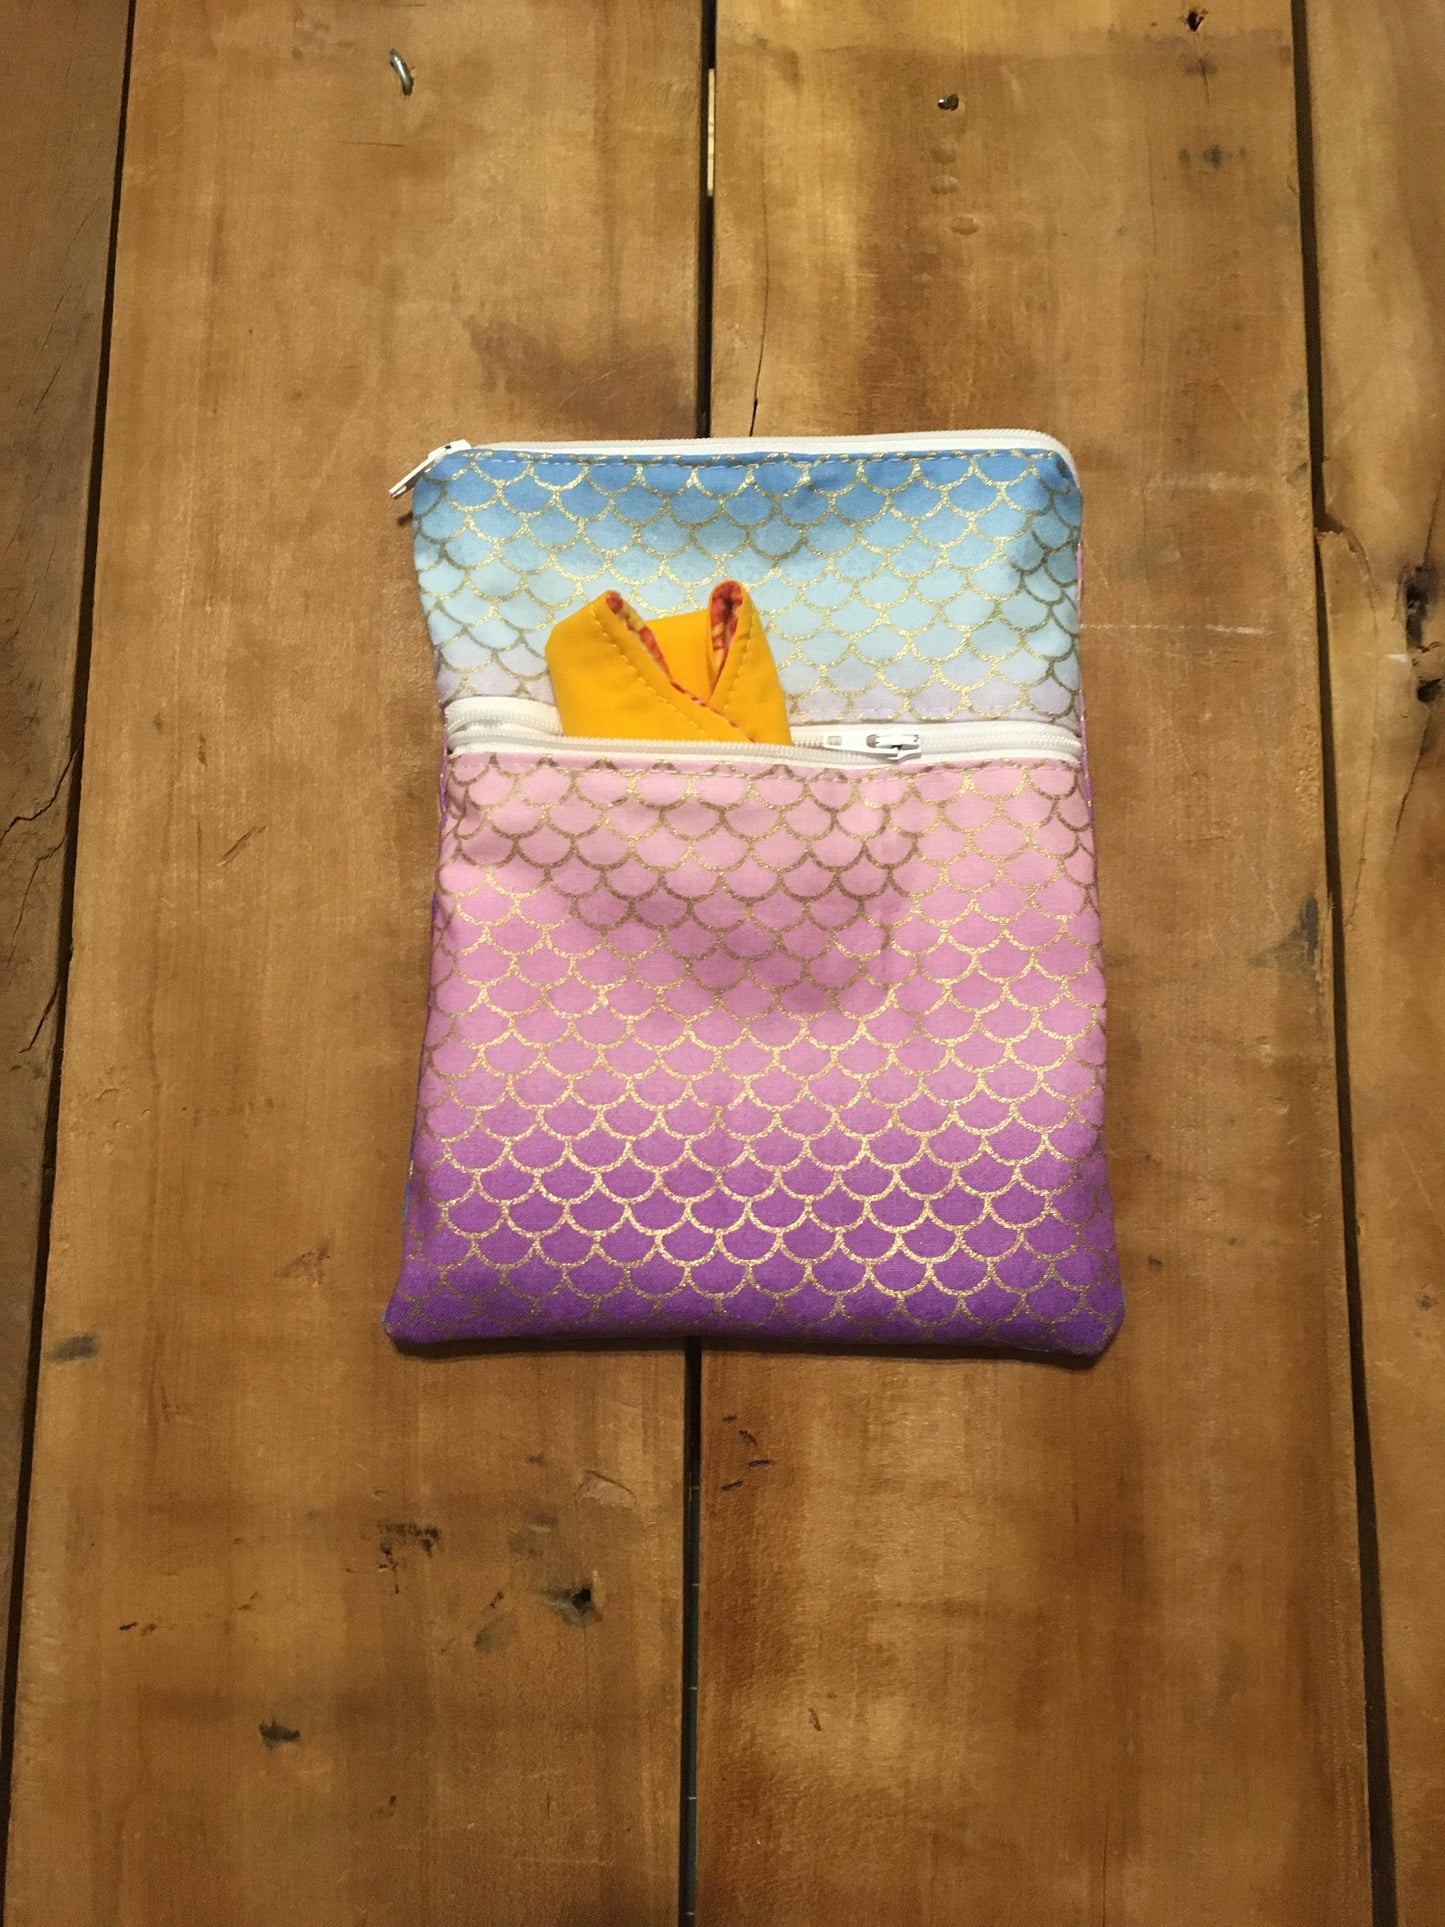 Ombre mermaid scales wet dry cloth pads bag - top pocket is the wet pocket and front pocket is the dry pocket